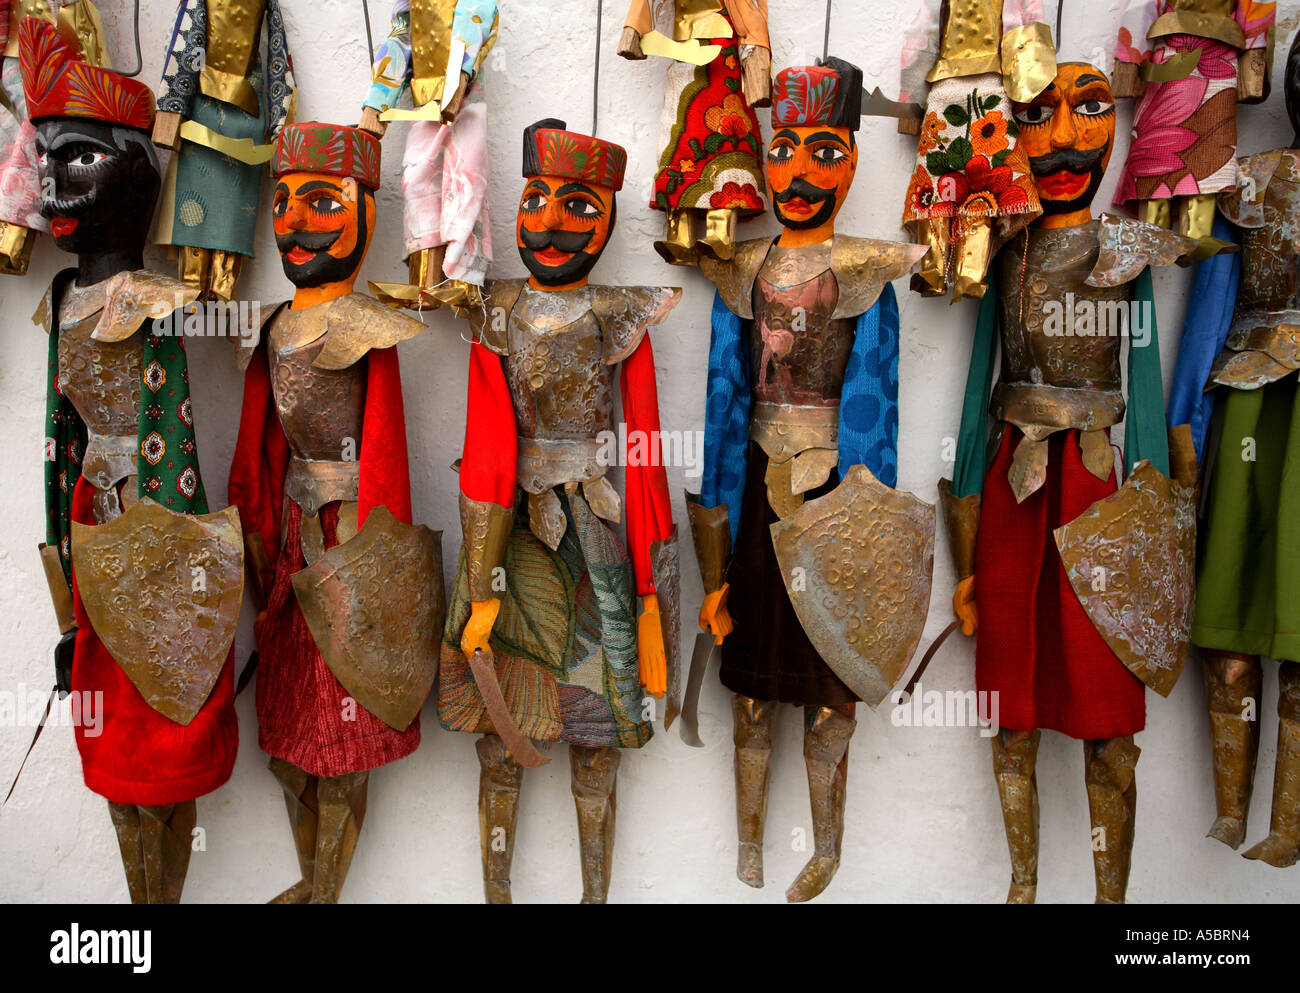 Horizontal close up landscape detail of brightly coloured puppets hanging on a wall, Sidi Bou Said, Tunis, Tunisia, North Africa Stock Photo